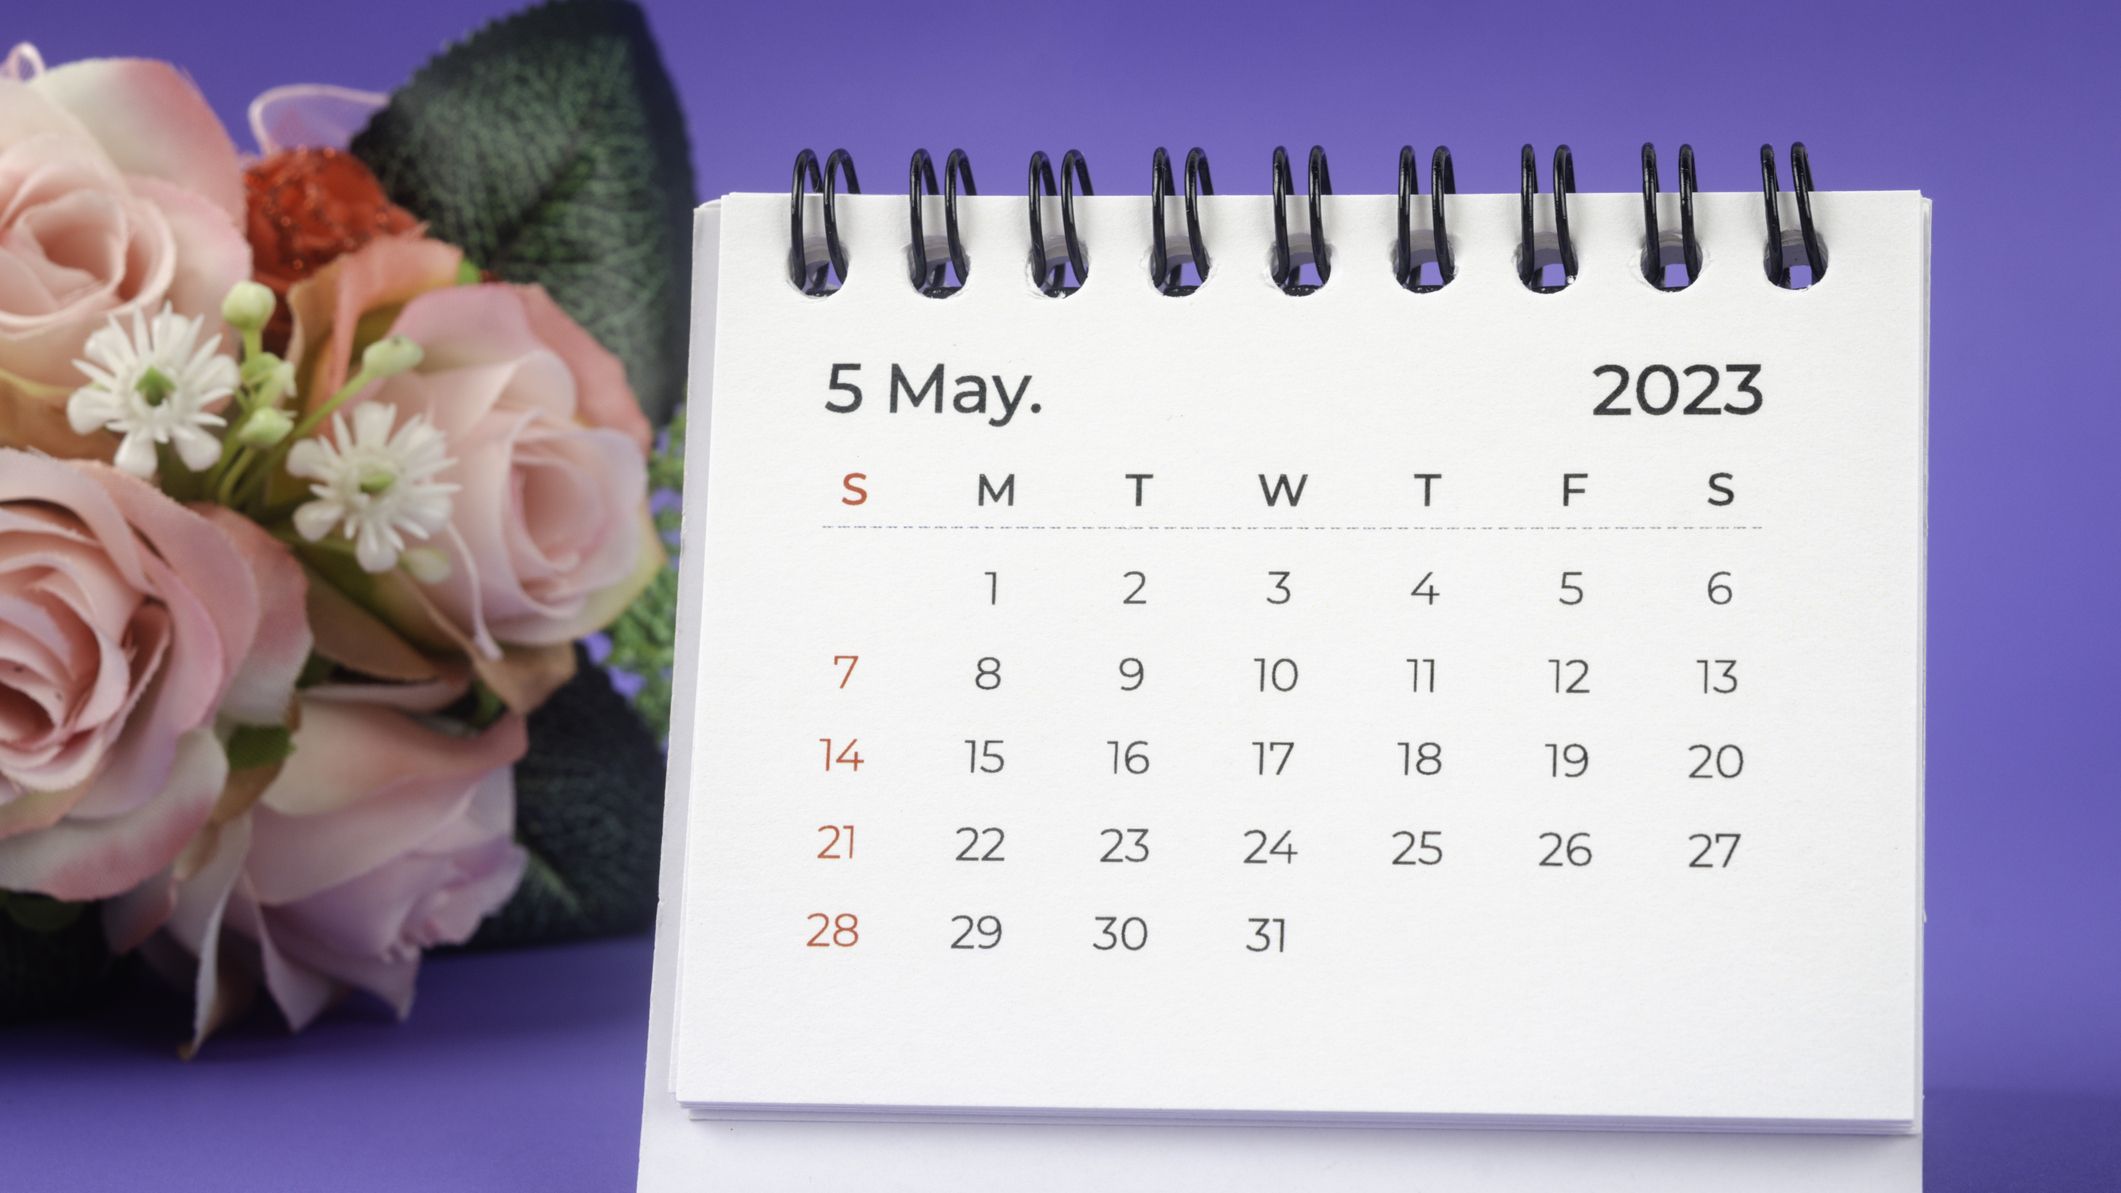 Cancer Awareness in 2023: Calendar of Monthly Observances and